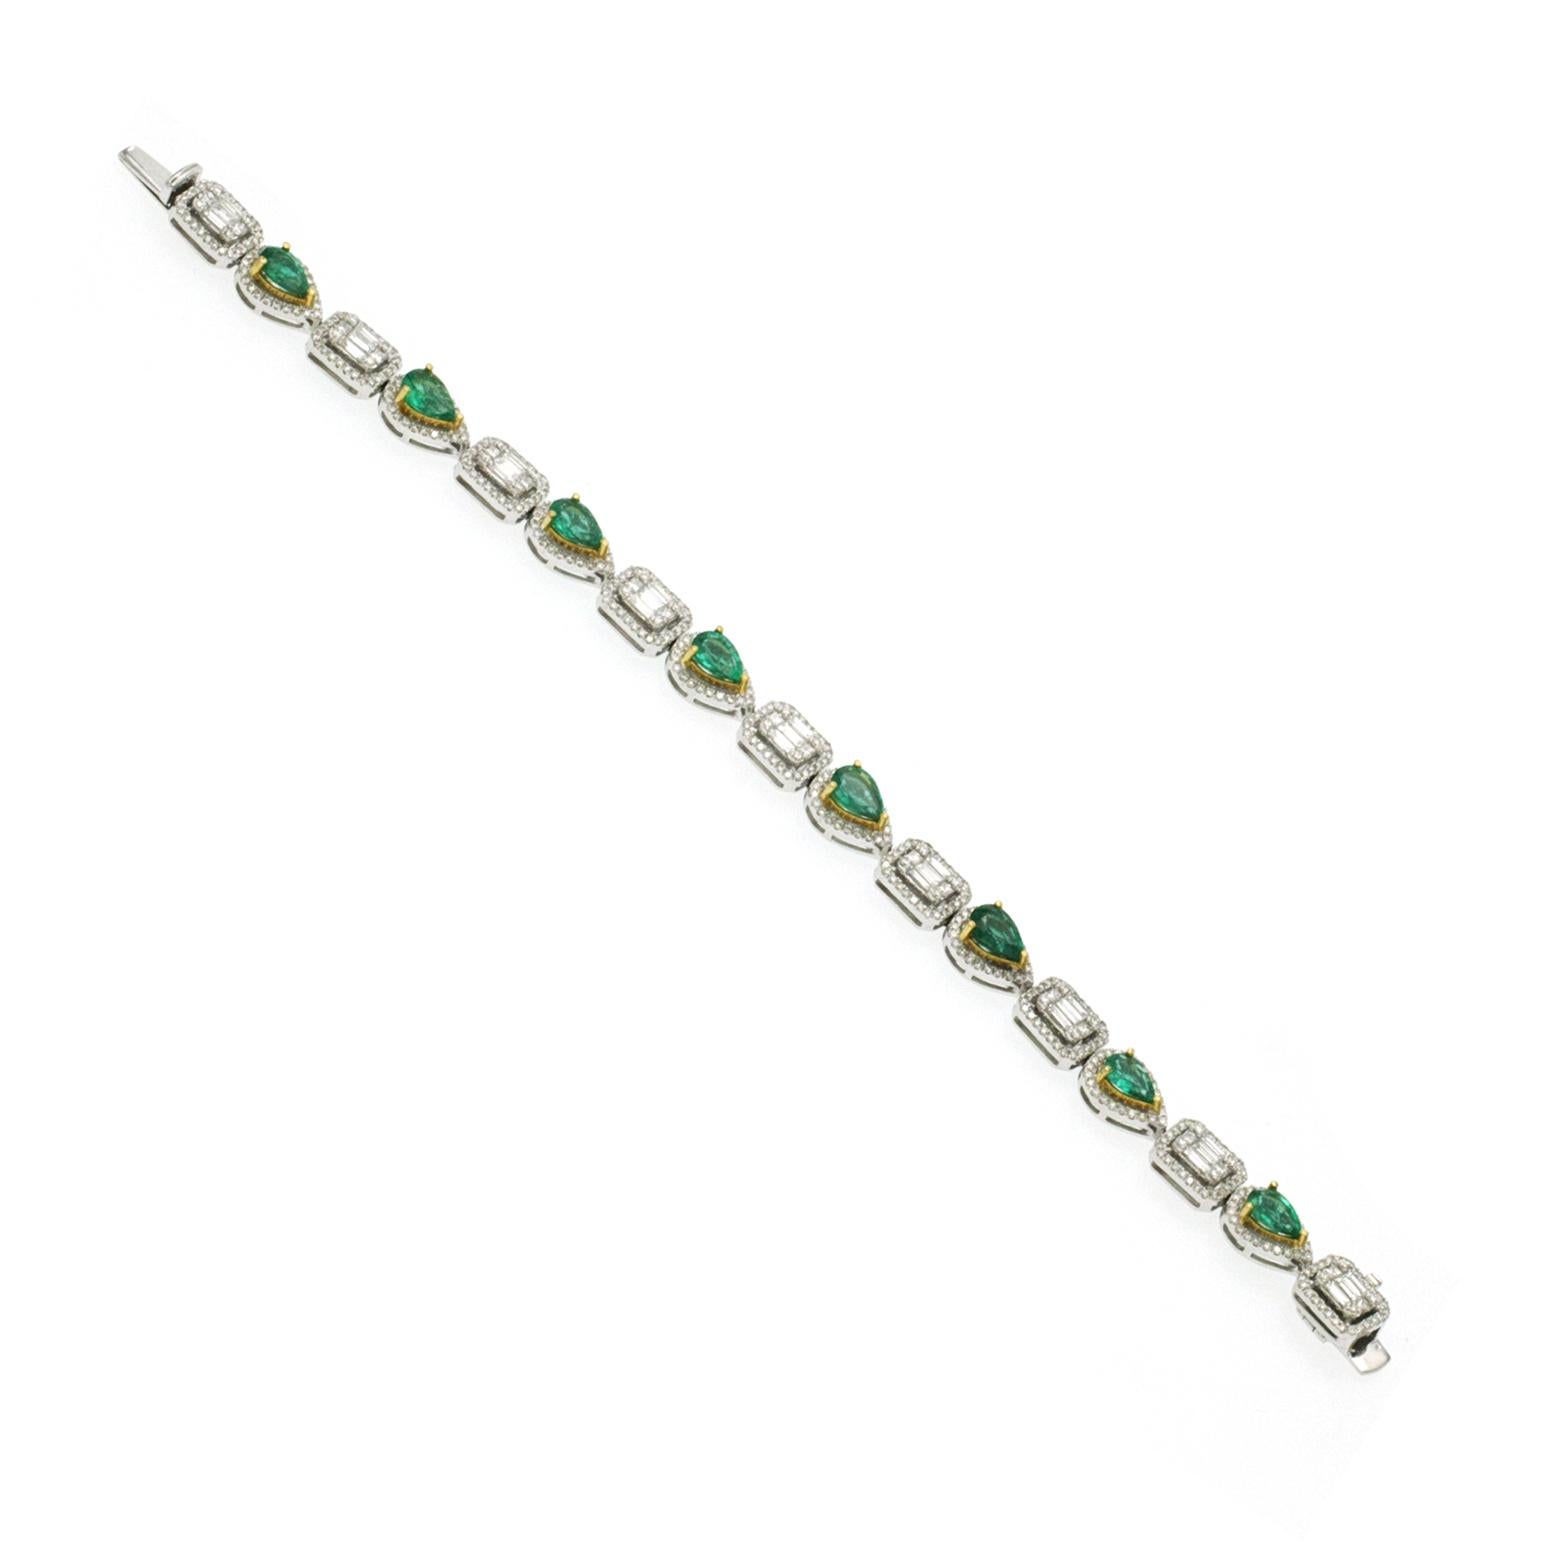 5.80 CT Natural Emerald & 4.58 CT Diamonds on 18K White Gold Bracelet In Excellent Condition For Sale In Los Angeles, CA